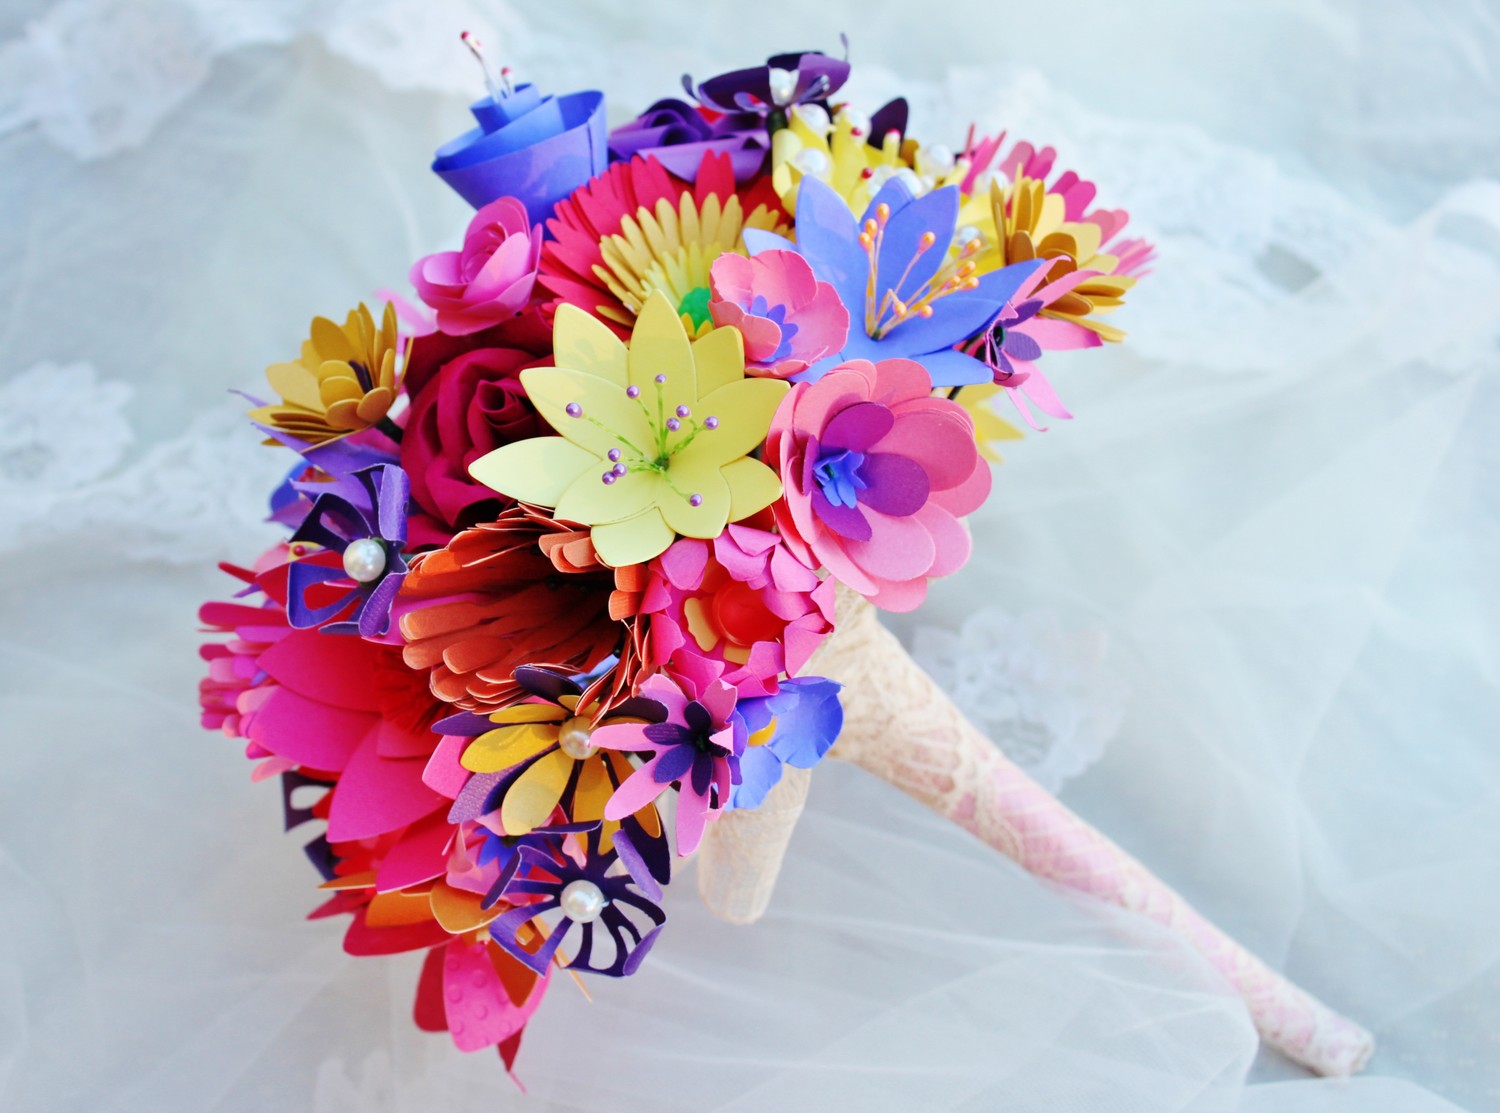 How to make a paper flower bouquet with pictures)   